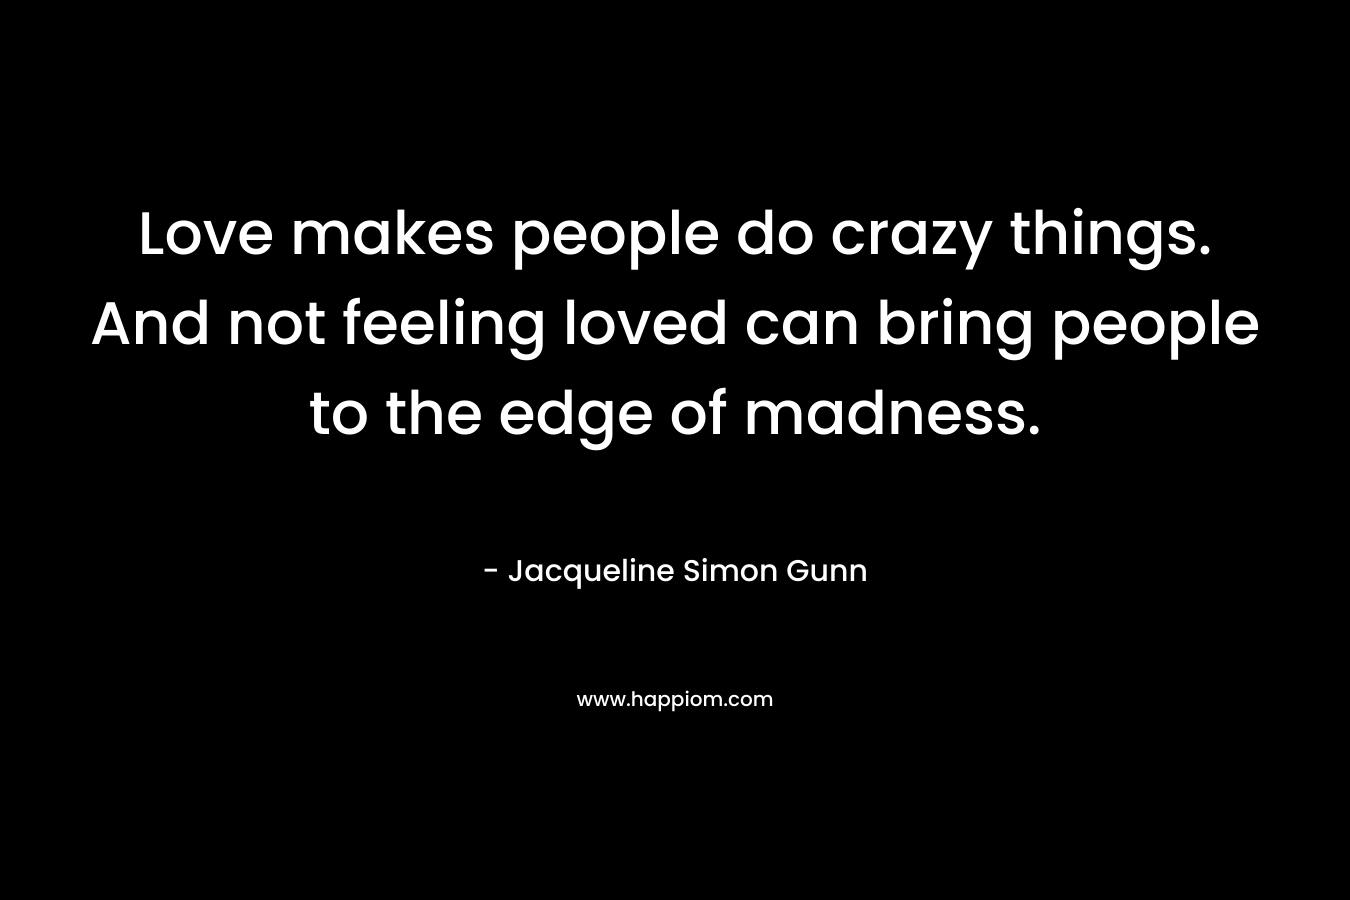 Love makes people do crazy things. And not feeling loved can bring people to the edge of madness. – Jacqueline Simon Gunn